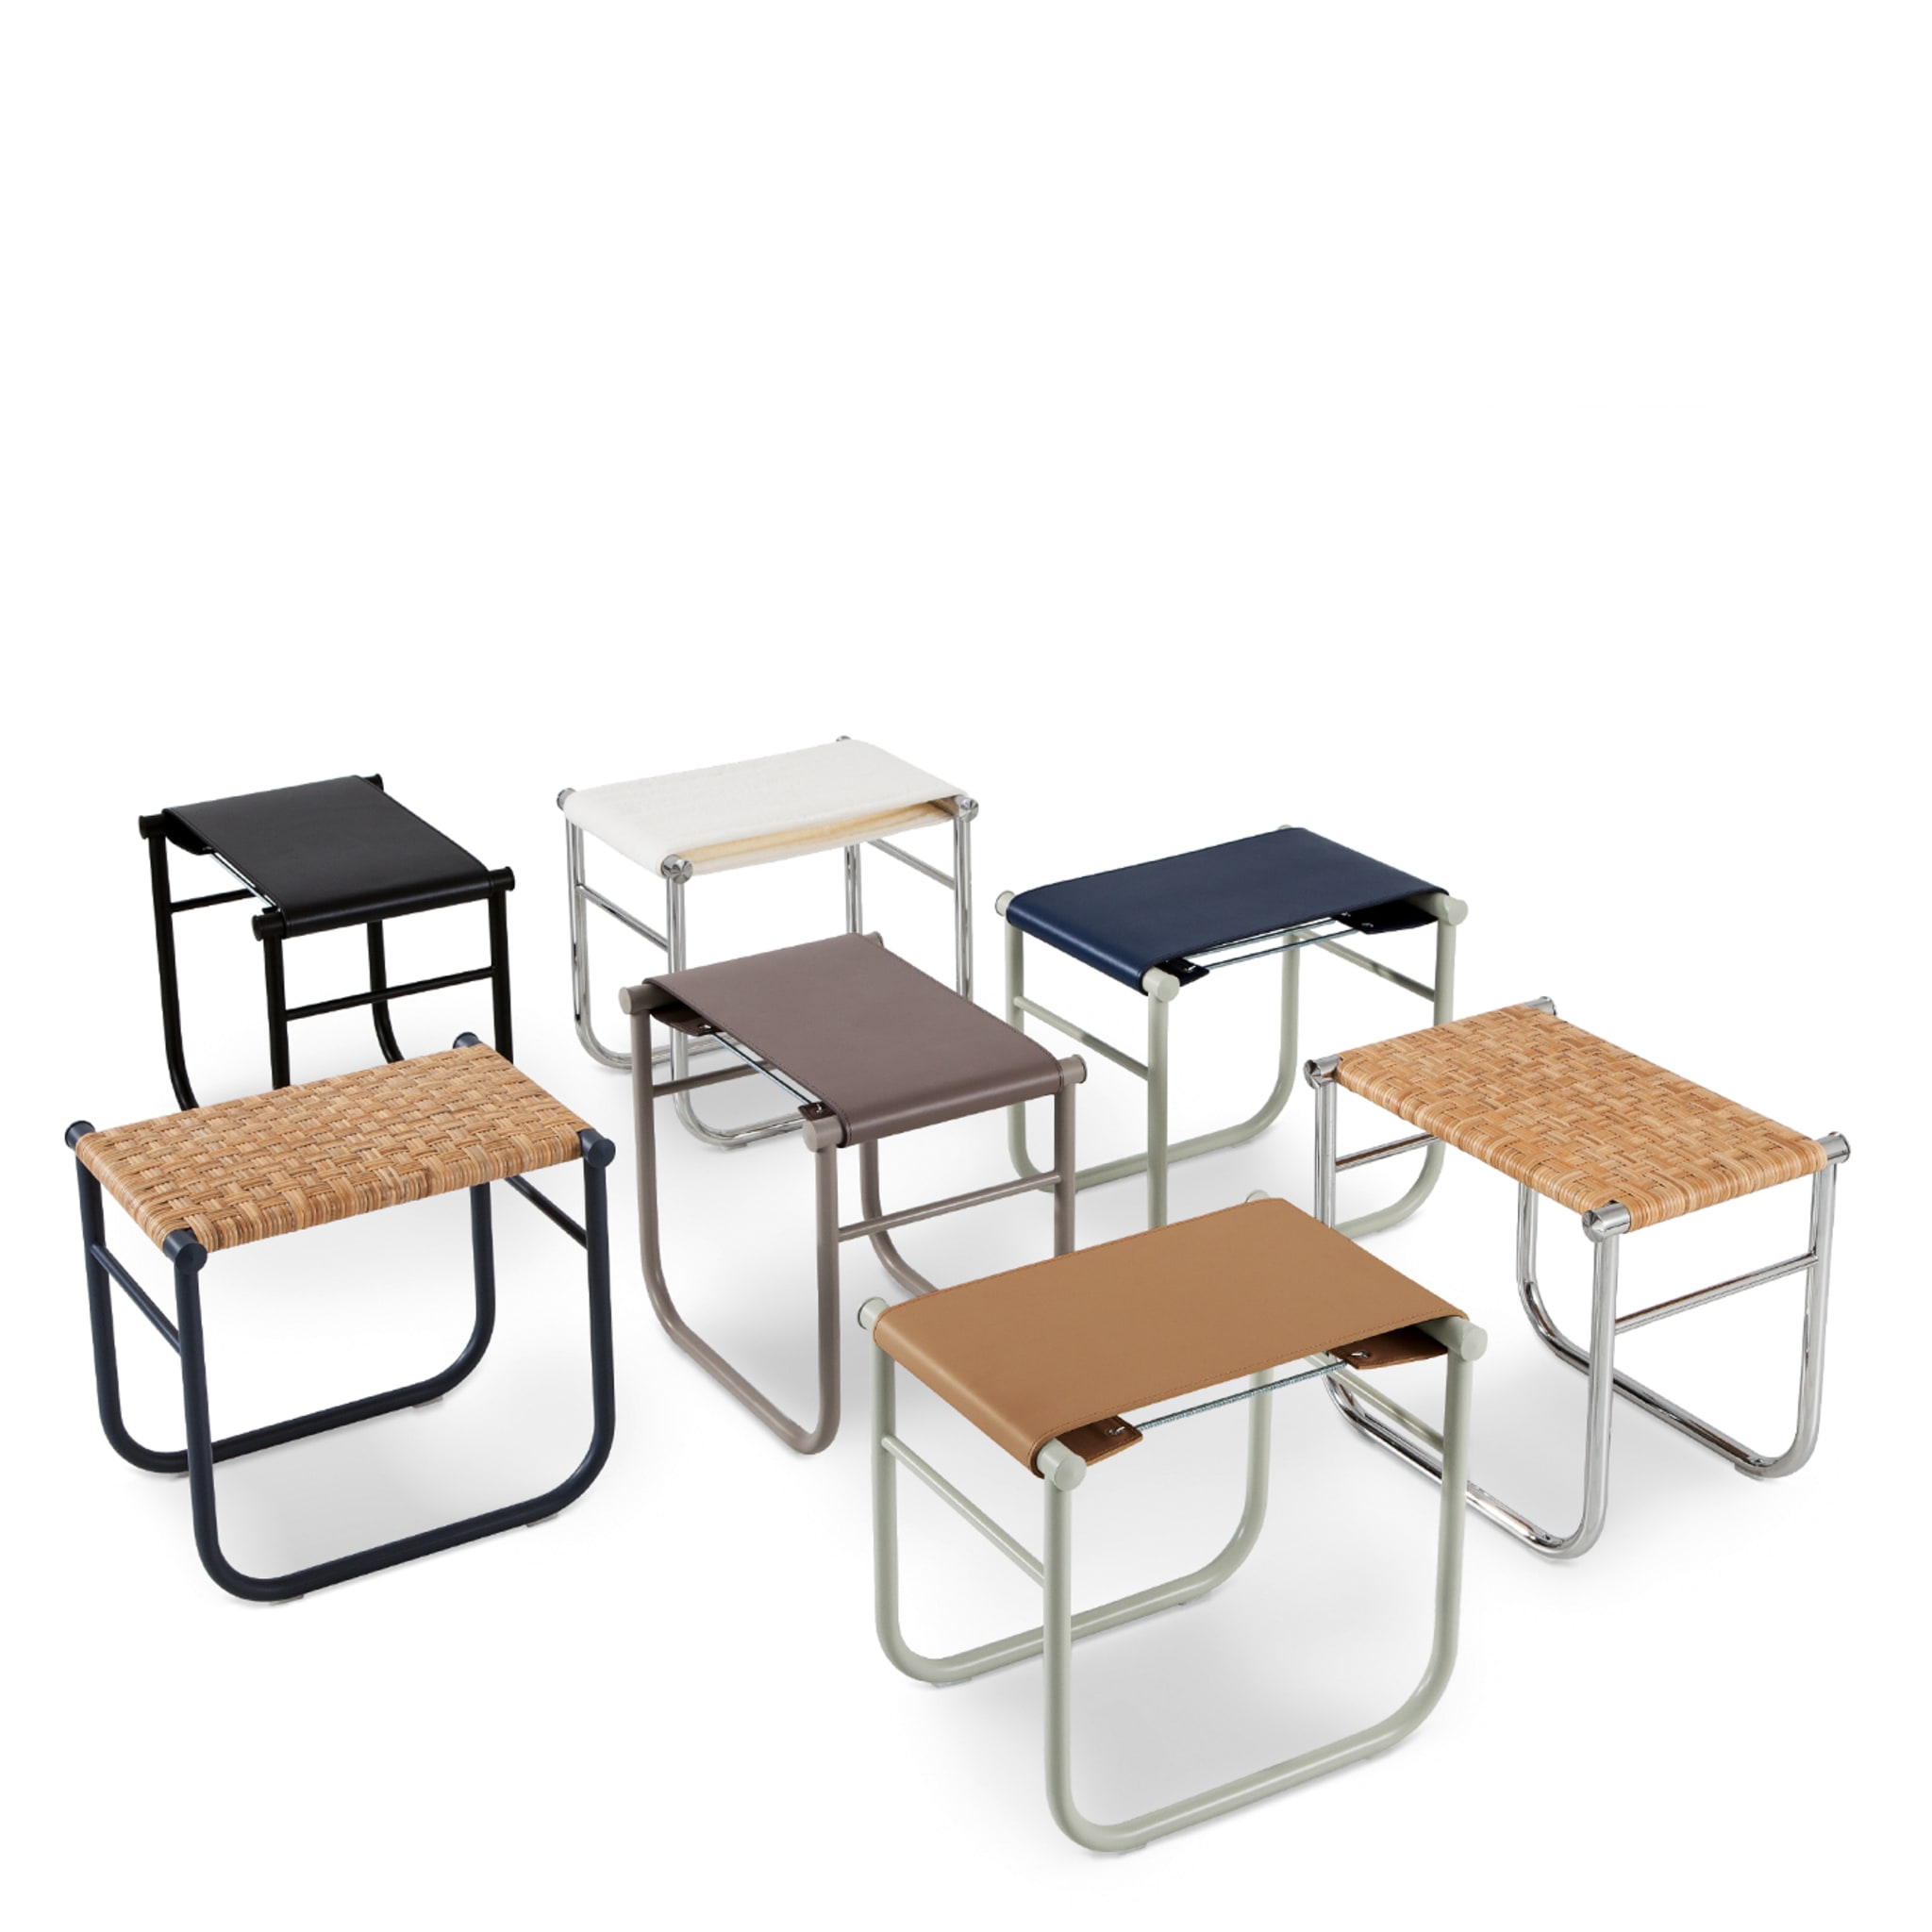 9 Tabouret By Charlotte Perriand - Rattan - Alternative view 1